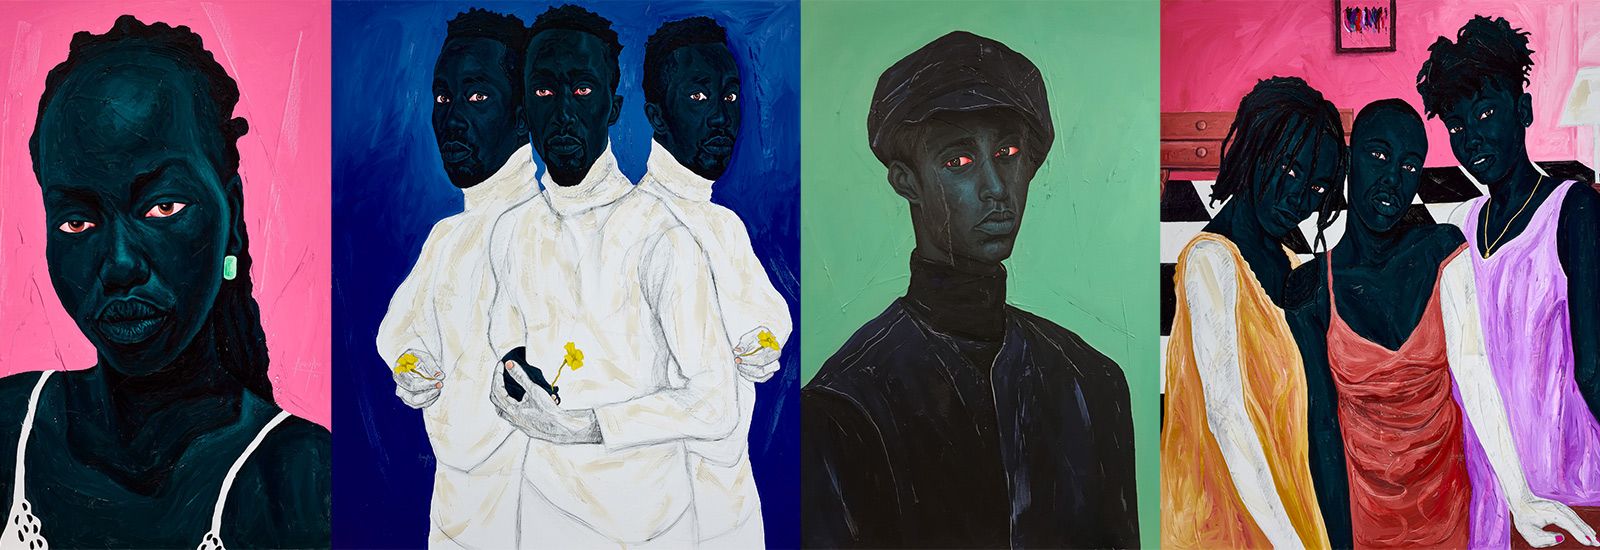 Paintings from 'My Complexion', an art exhibition by Annan Affotey at St Hugh's.